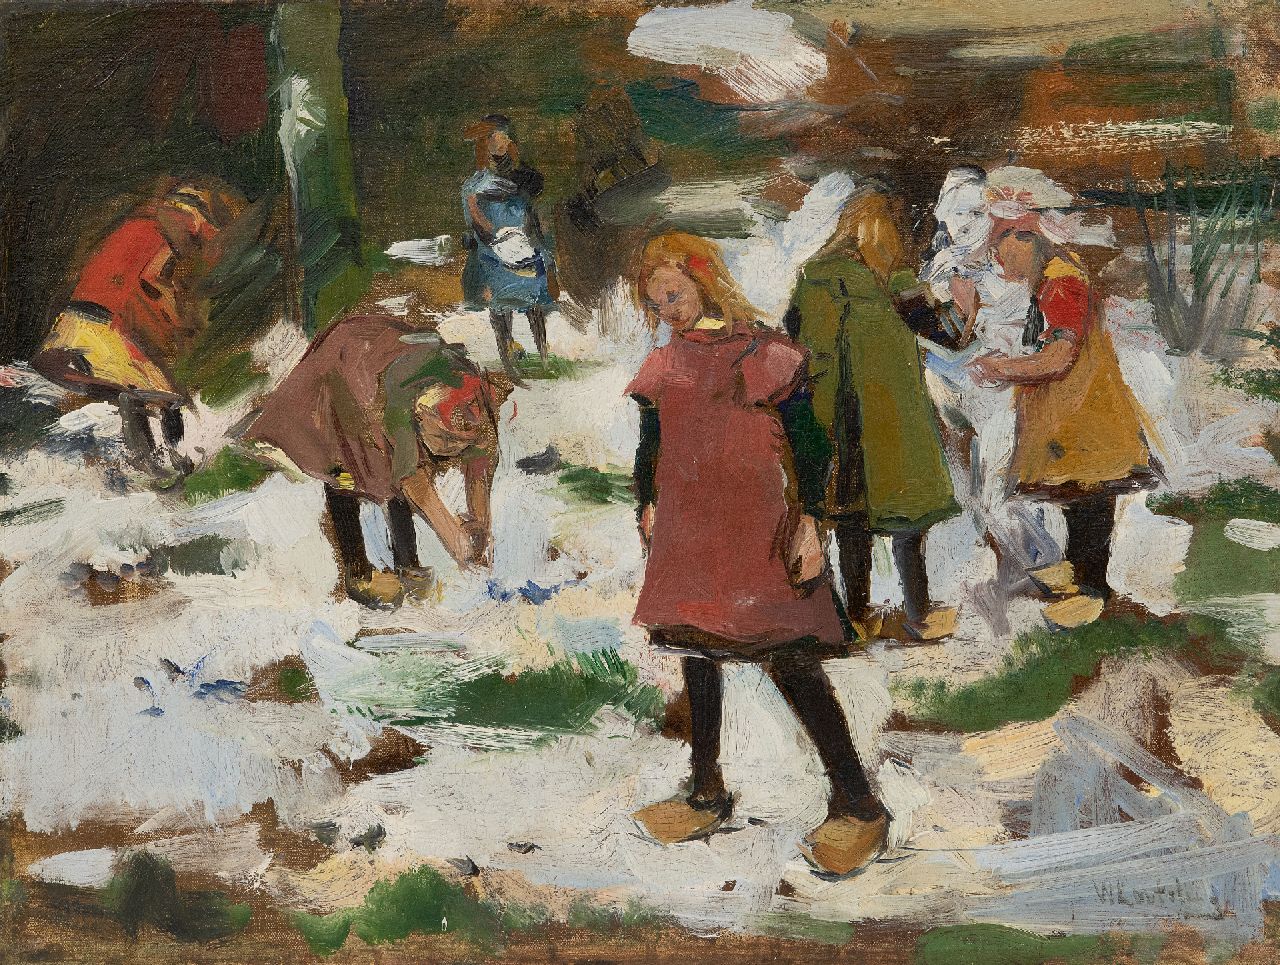 Korteling W.  | Willem Korteling, Children playing in the snow, oil on canvas 33.5 x 44.3 cm, signed l.r.